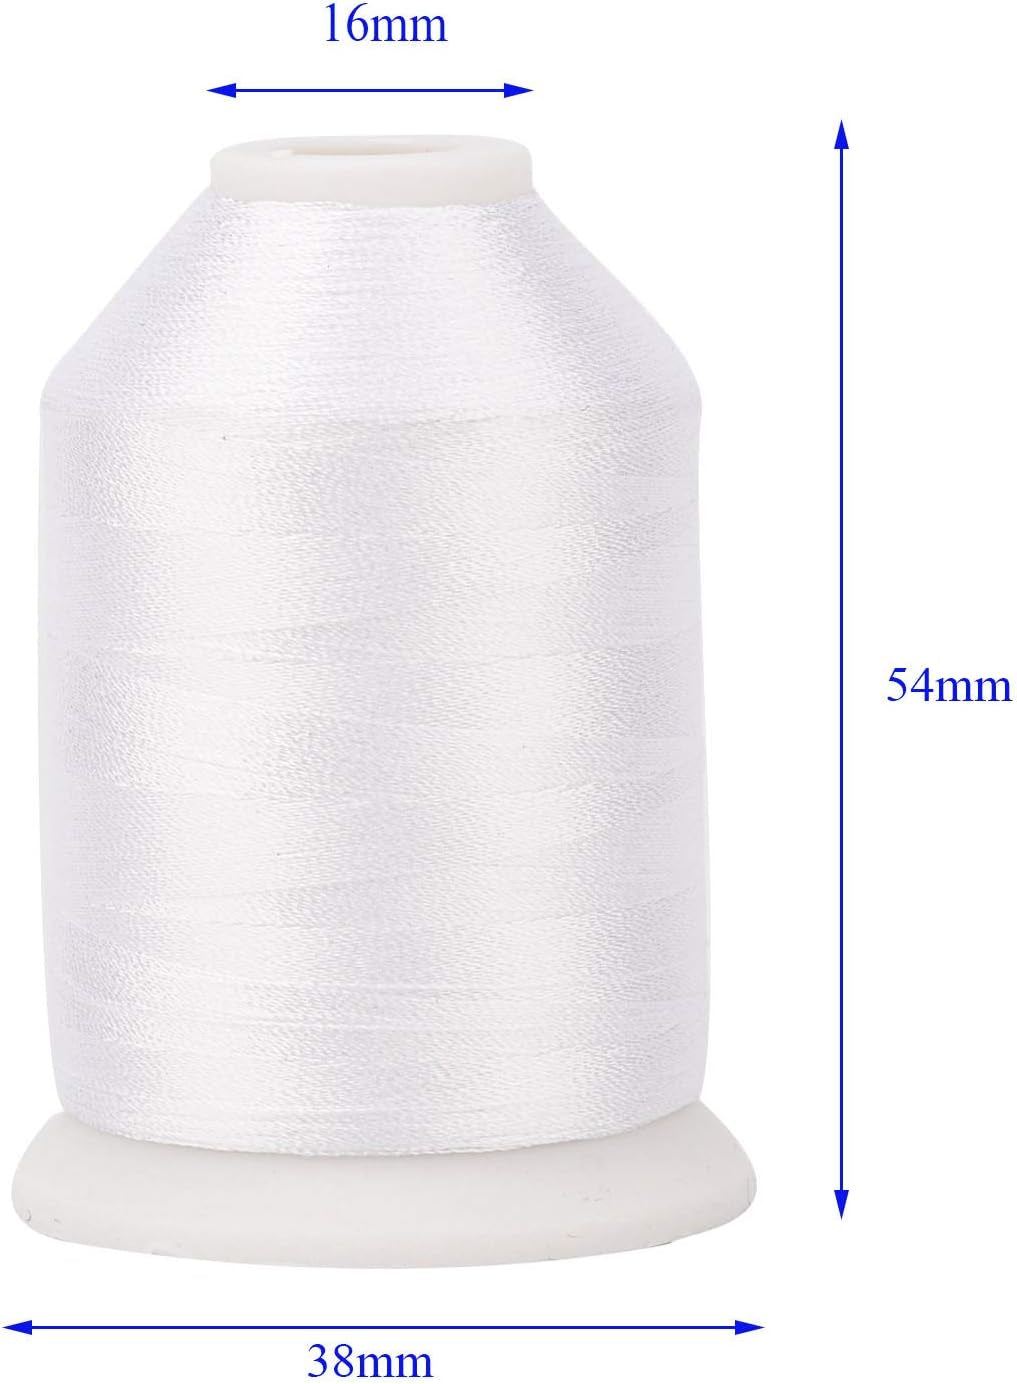 60WT Sewing Embroidery Machine Thread Kit - 40 Colors 1100 Yards Spool for Brother Janome Etc Sewing Embroidery Machines…